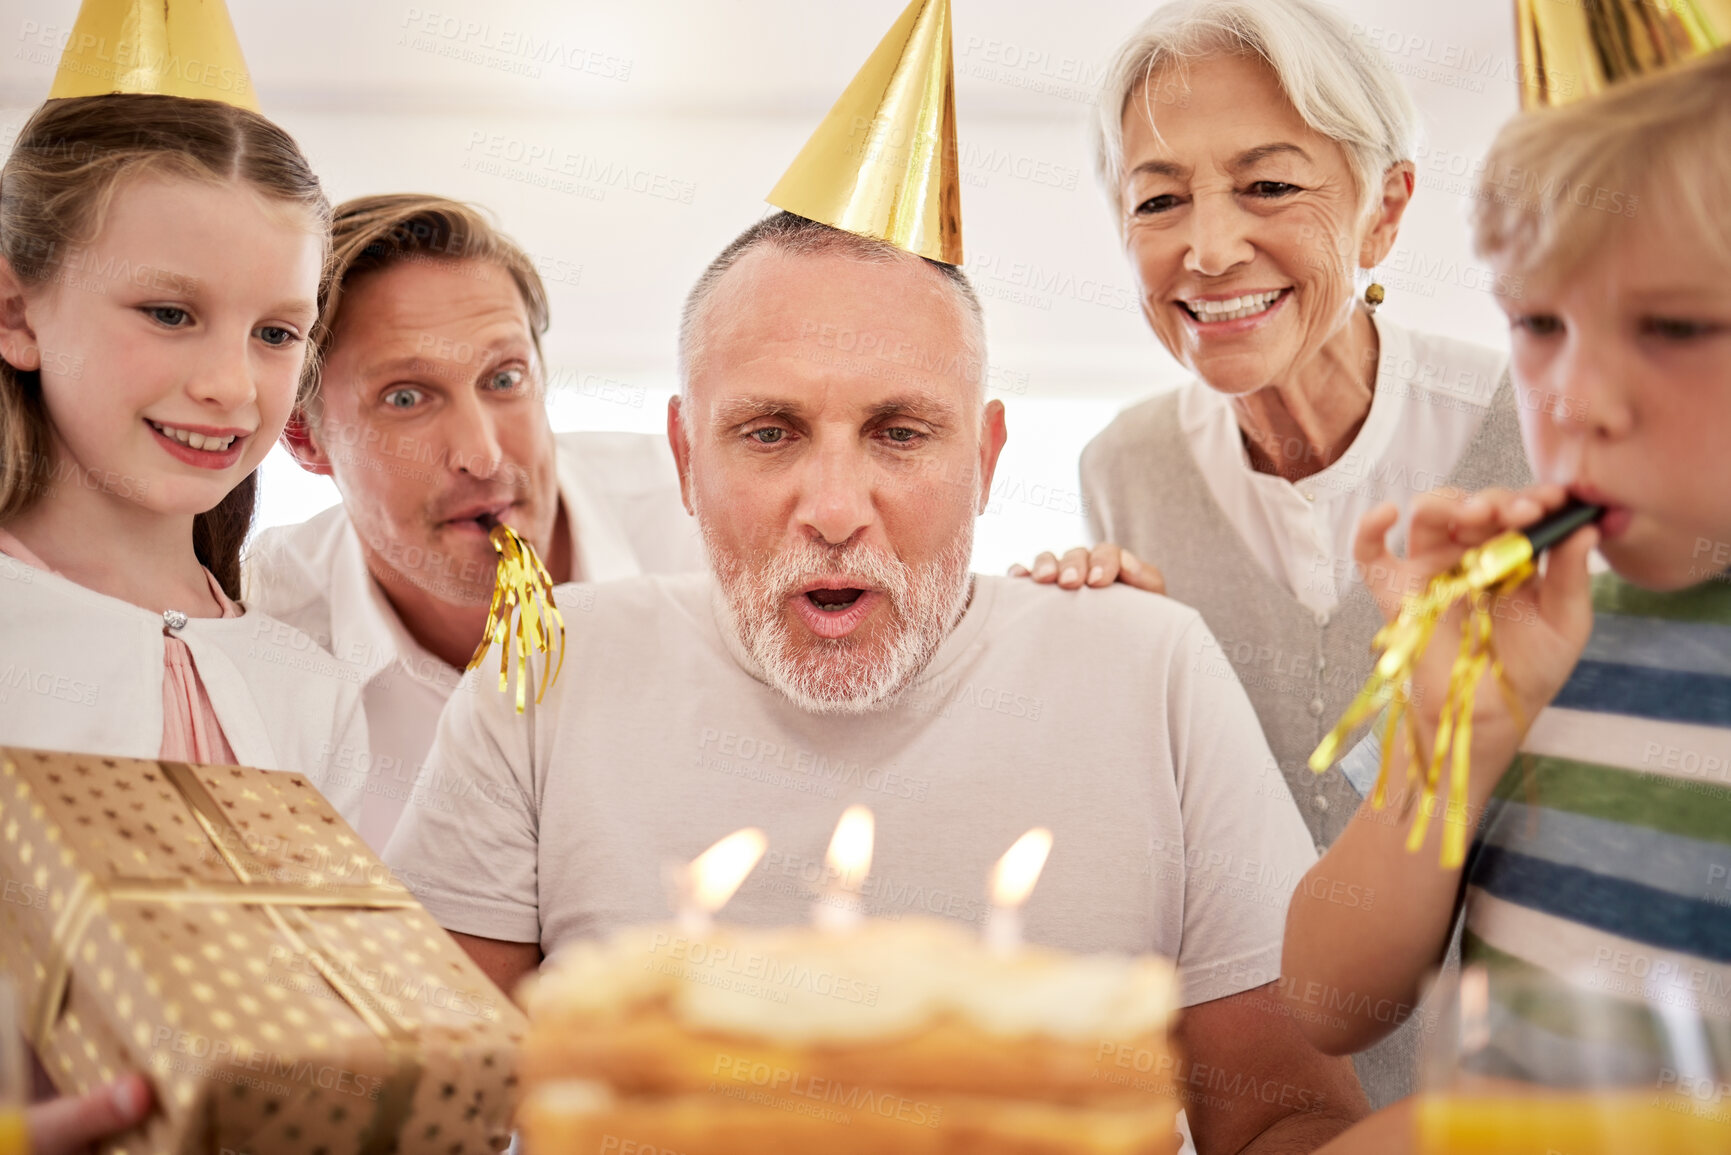 Buy stock photo Senior man celebrating his birthday with his family at home, wearing party hats and blowing whistles. Grandpa blowing out birthday candles and making a wish surrounded by his grandkids, wife and son